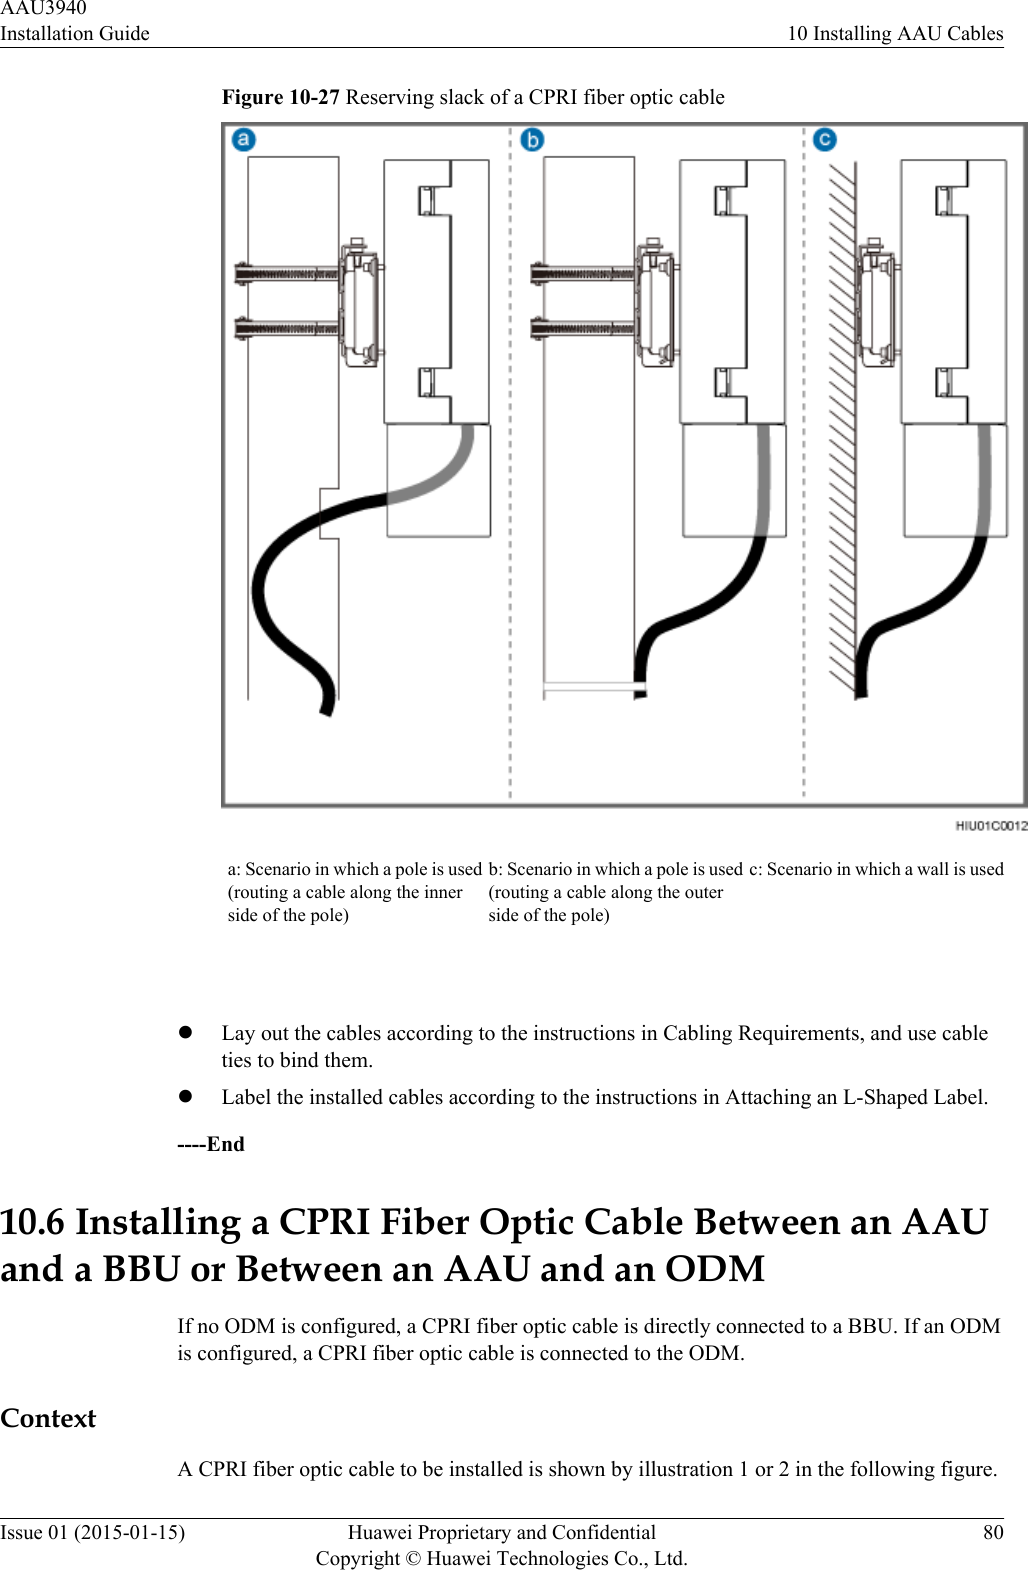 Figure 10-27 Reserving slack of a CPRI fiber optic cablea: Scenario in which a pole is used(routing a cable along the innerside of the pole)b: Scenario in which a pole is used(routing a cable along the outerside of the pole)c: Scenario in which a wall is used lLay out the cables according to the instructions in Cabling Requirements, and use cableties to bind them.lLabel the installed cables according to the instructions in Attaching an L-Shaped Label.----End10.6 Installing a CPRI Fiber Optic Cable Between an AAUand a BBU or Between an AAU and an ODMIf no ODM is configured, a CPRI fiber optic cable is directly connected to a BBU. If an ODMis configured, a CPRI fiber optic cable is connected to the ODM.ContextA CPRI fiber optic cable to be installed is shown by illustration 1 or 2 in the following figure.AAU3940Installation Guide 10 Installing AAU CablesIssue 01 (2015-01-15) Huawei Proprietary and ConfidentialCopyright © Huawei Technologies Co., Ltd.80